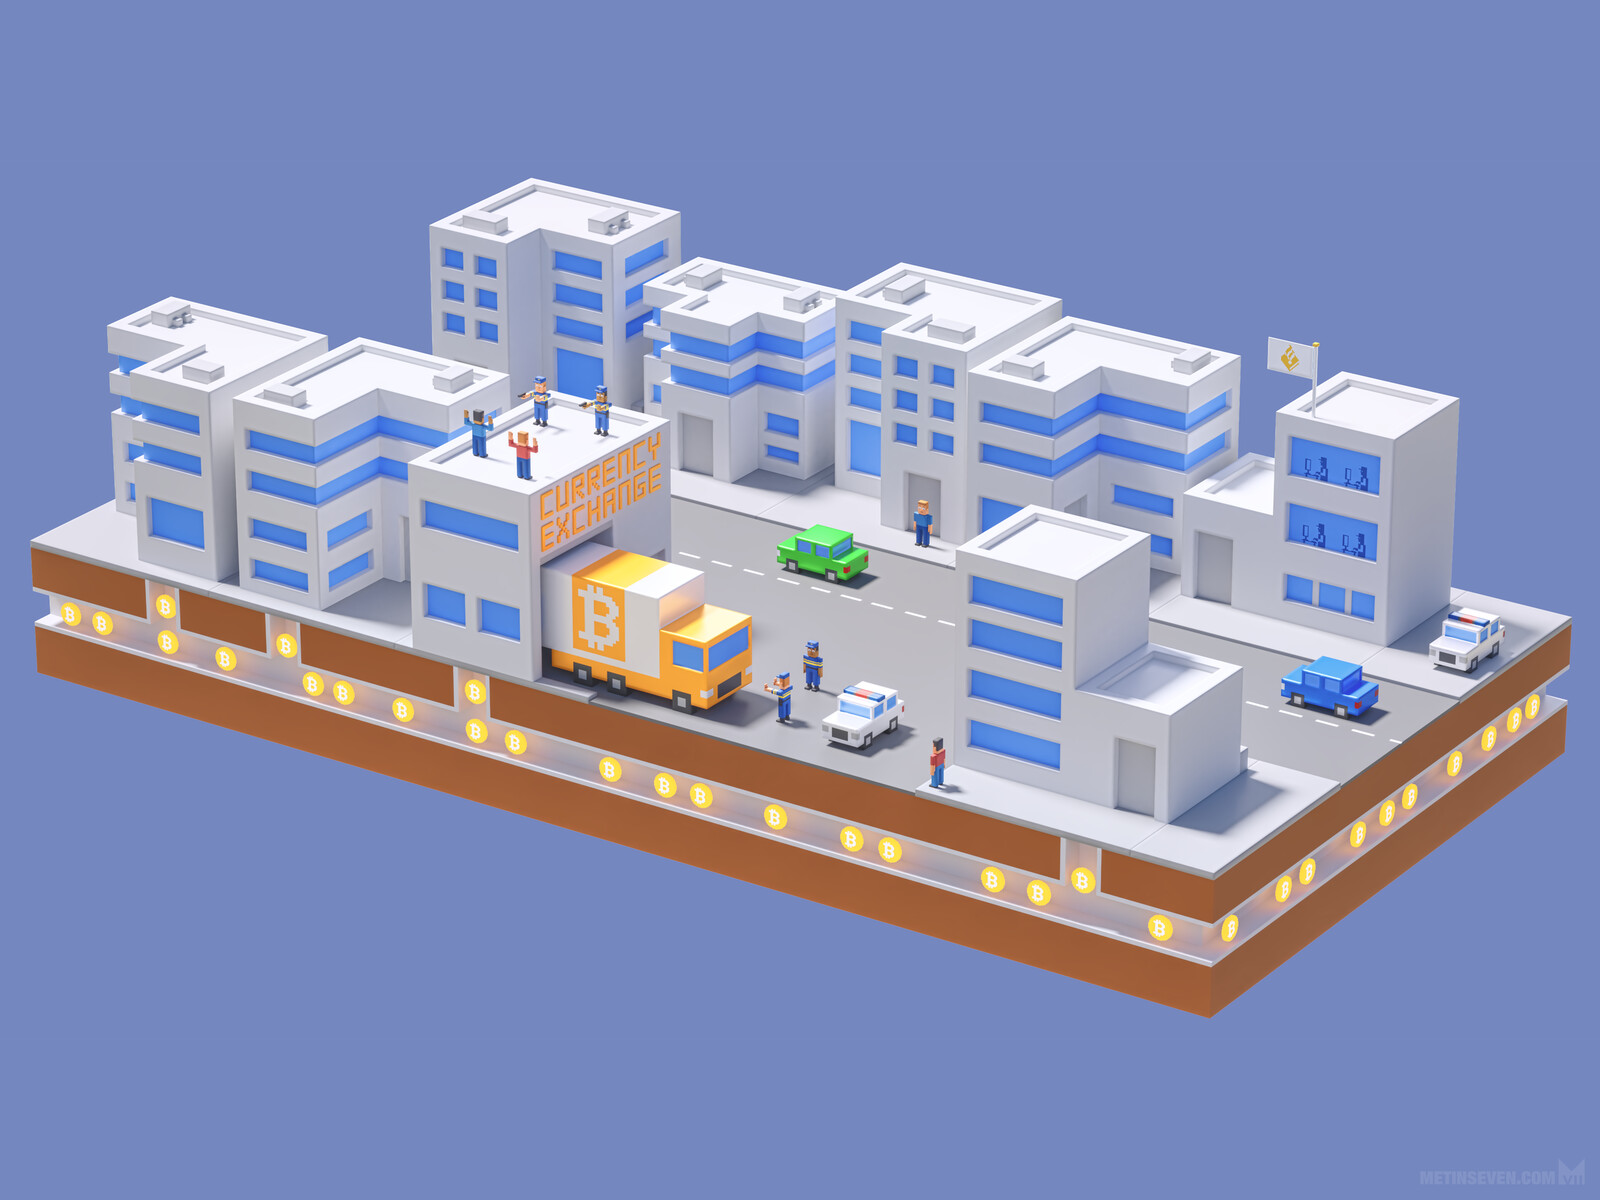 Isometric voxel-style Bitcoin money laundering crime infographics illustration for the Dutch National Police Corps